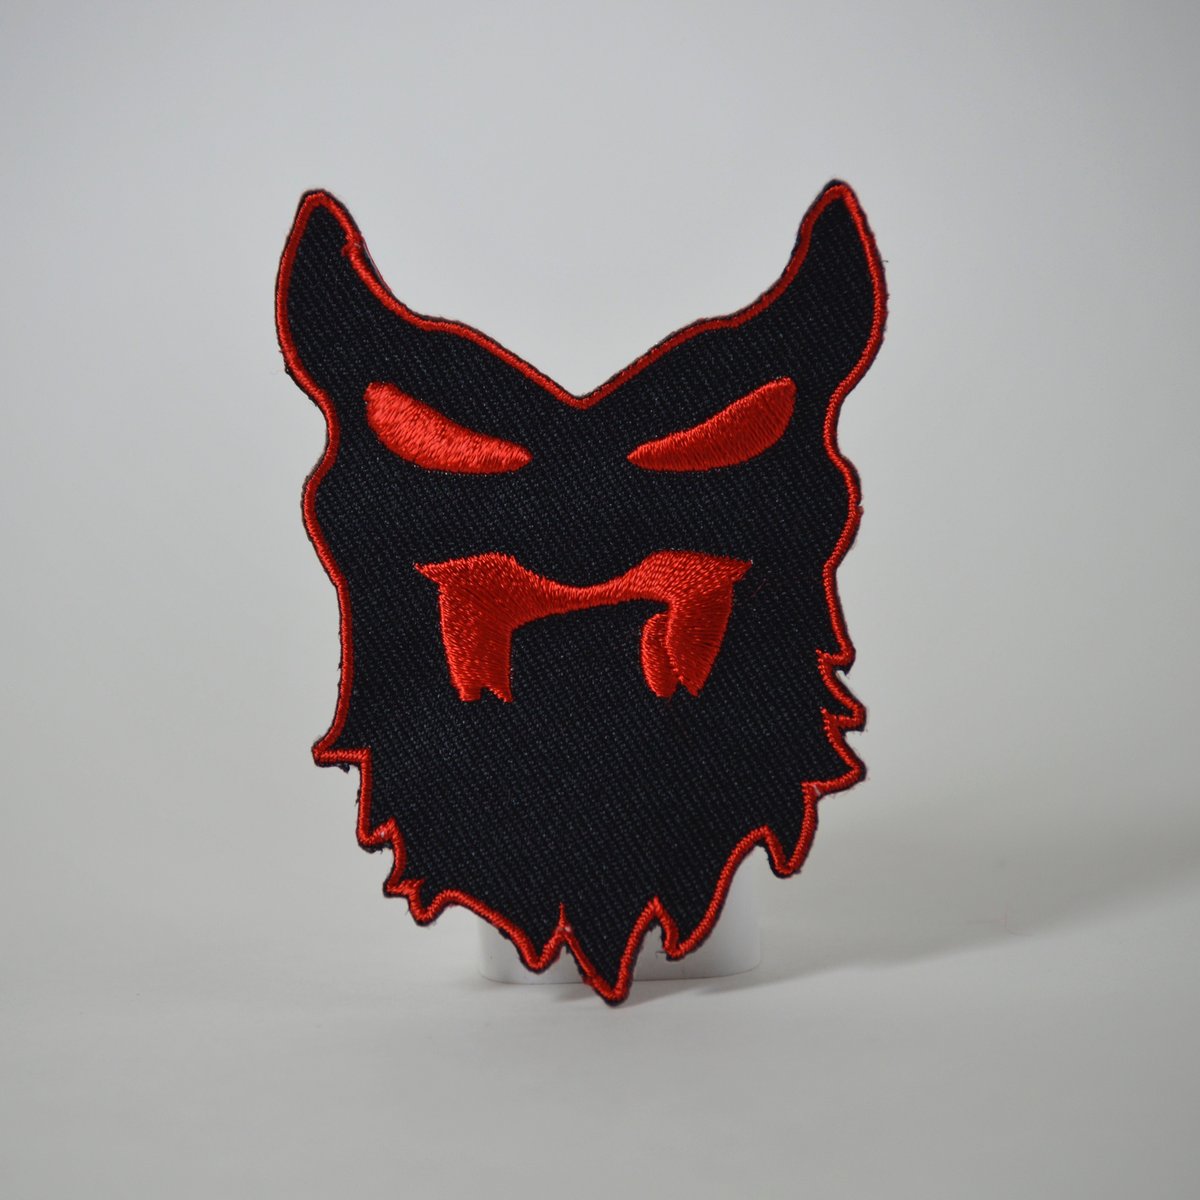 Image of Collectible Patch "THE BV MASK" 